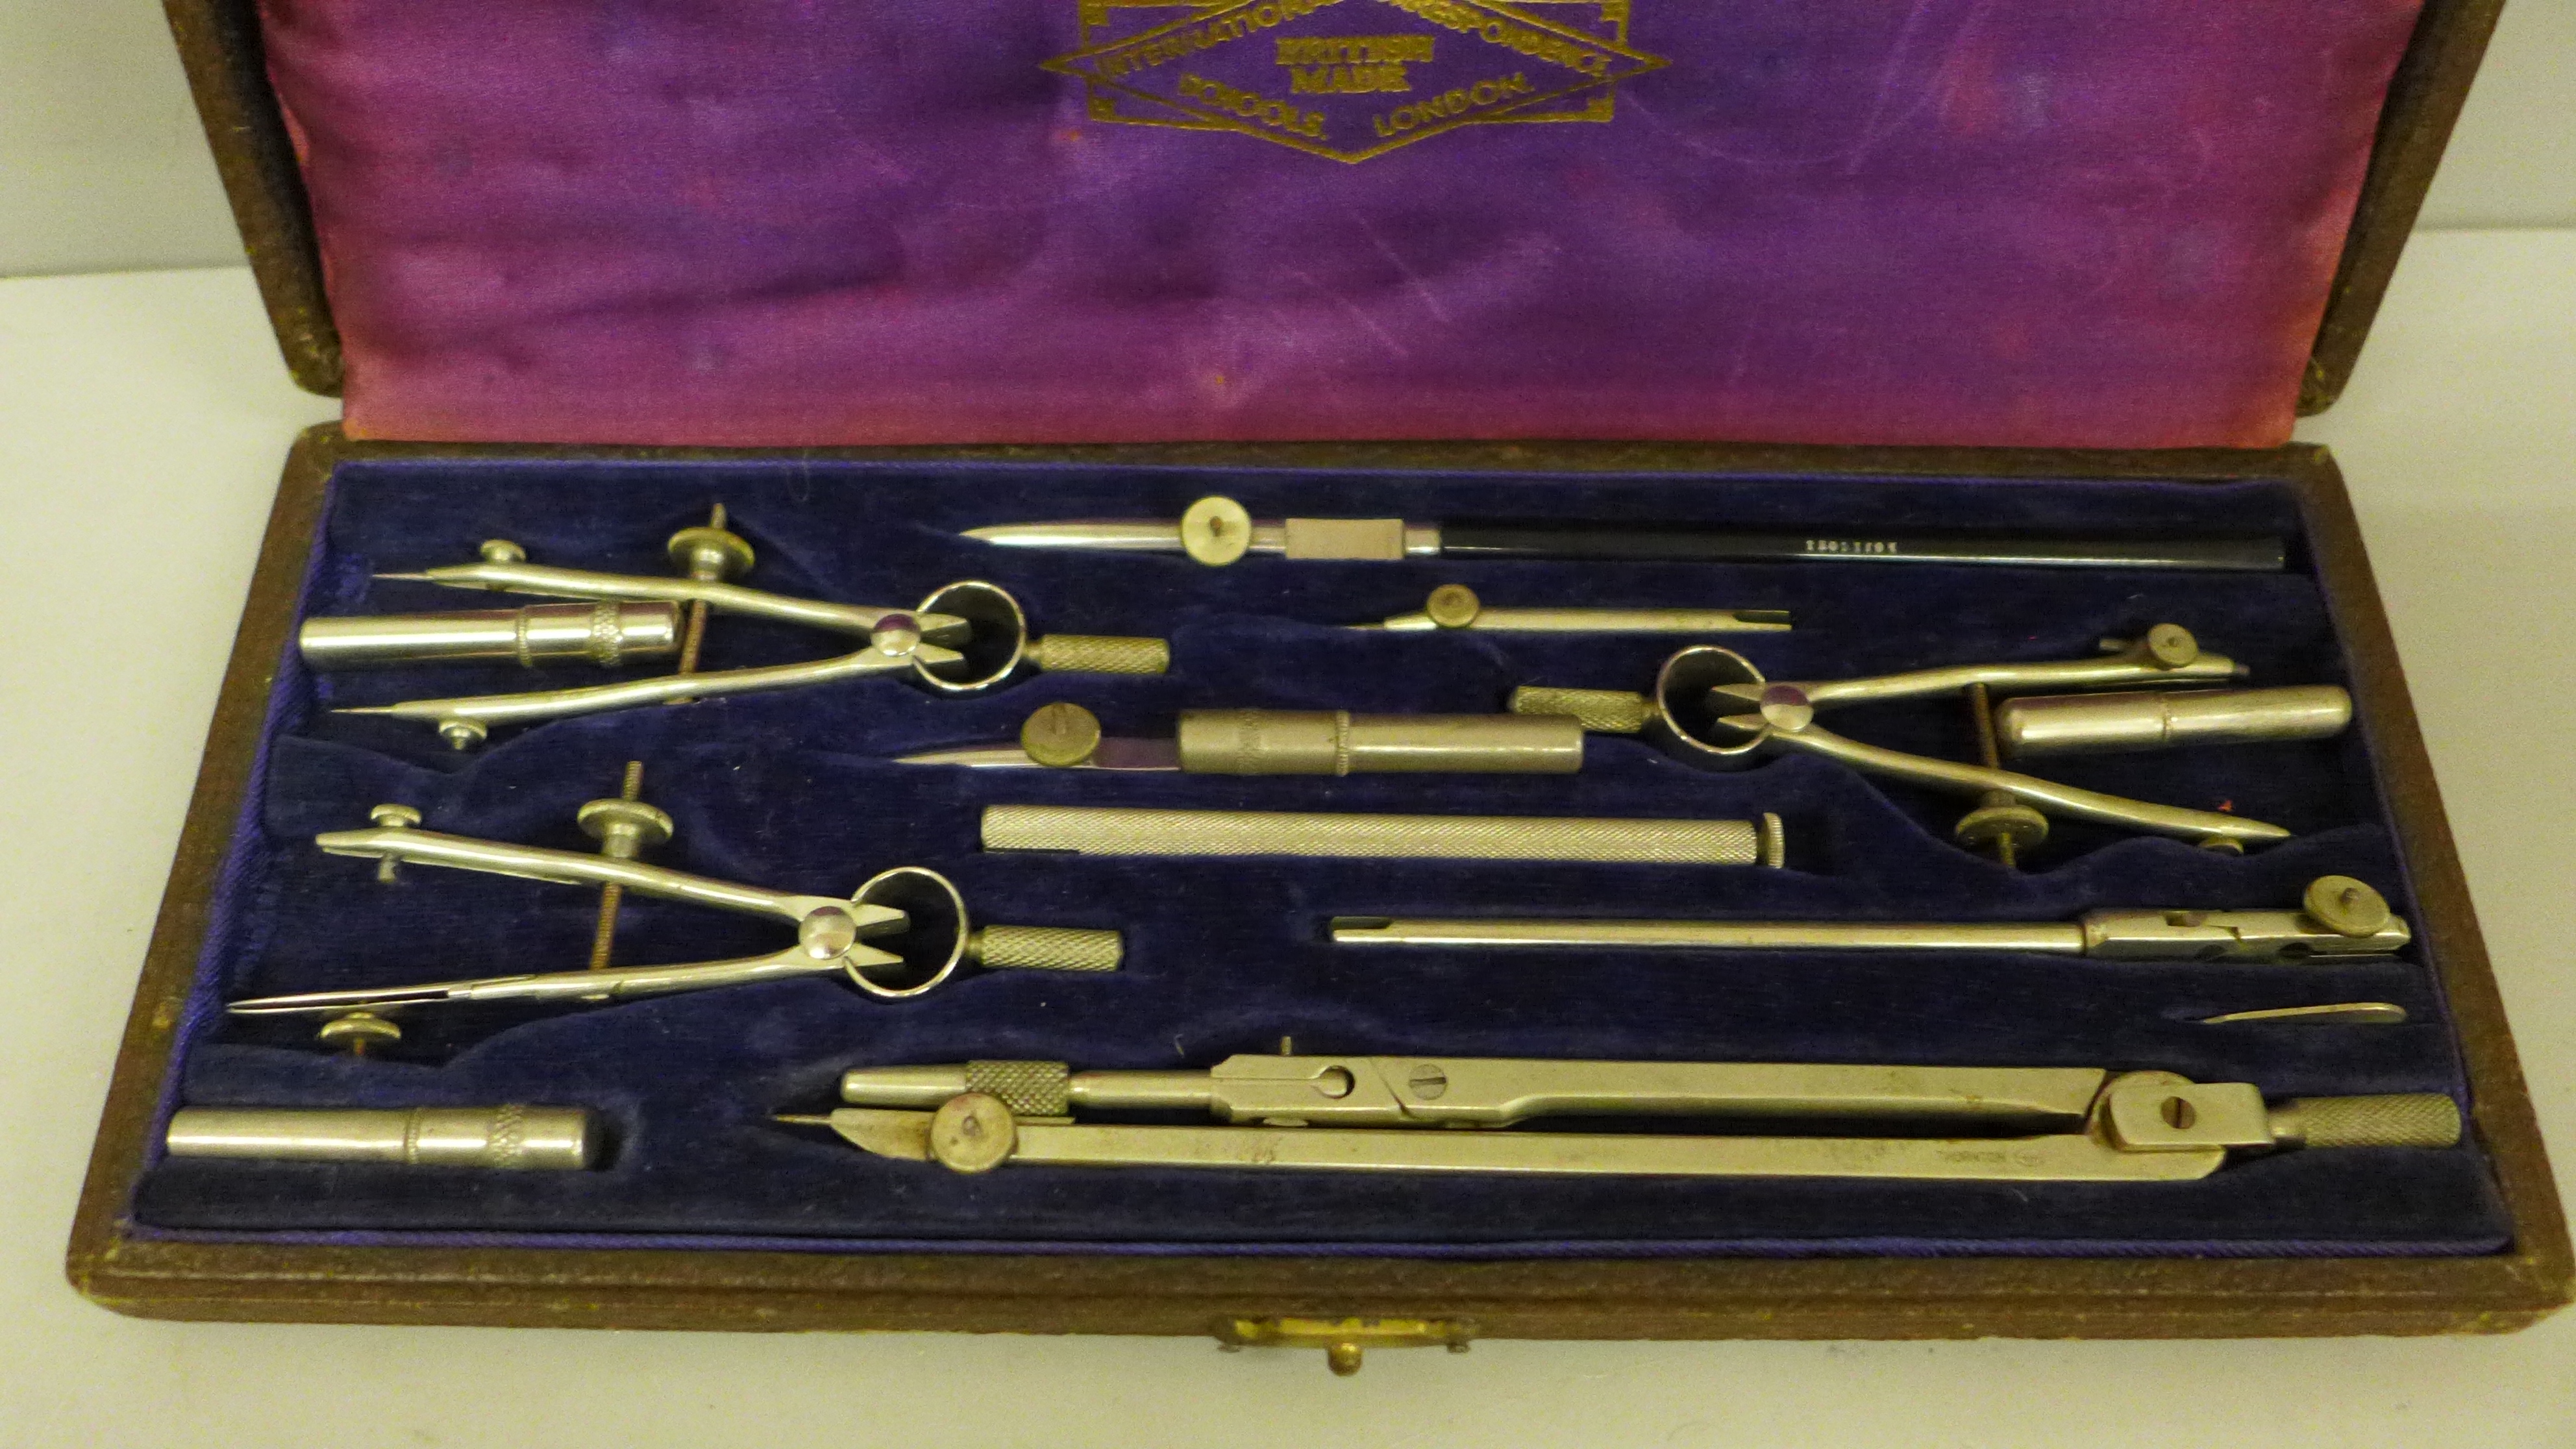 A cased set of technical drawing instruments, International Correspondence School, London - Image 3 of 3